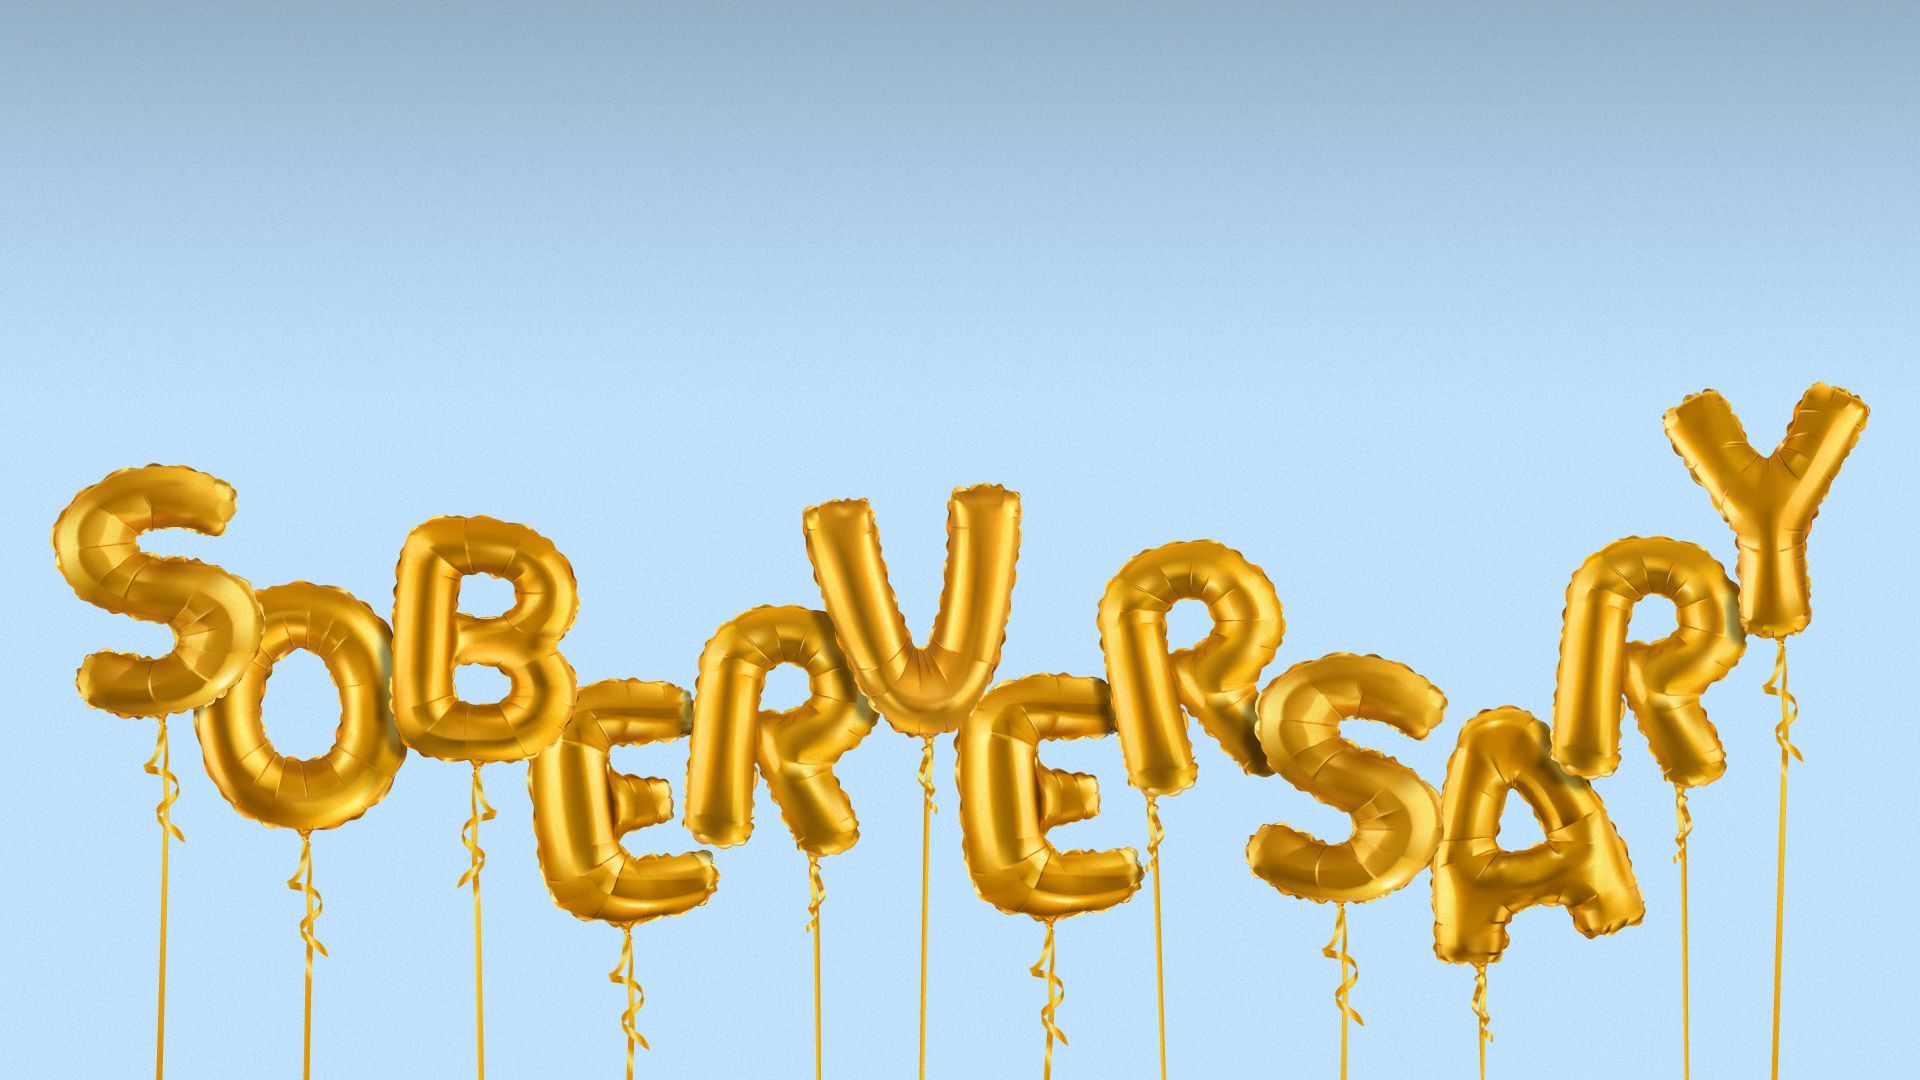 Illustration of letter balloons spelling out "SOBERVERSARY."